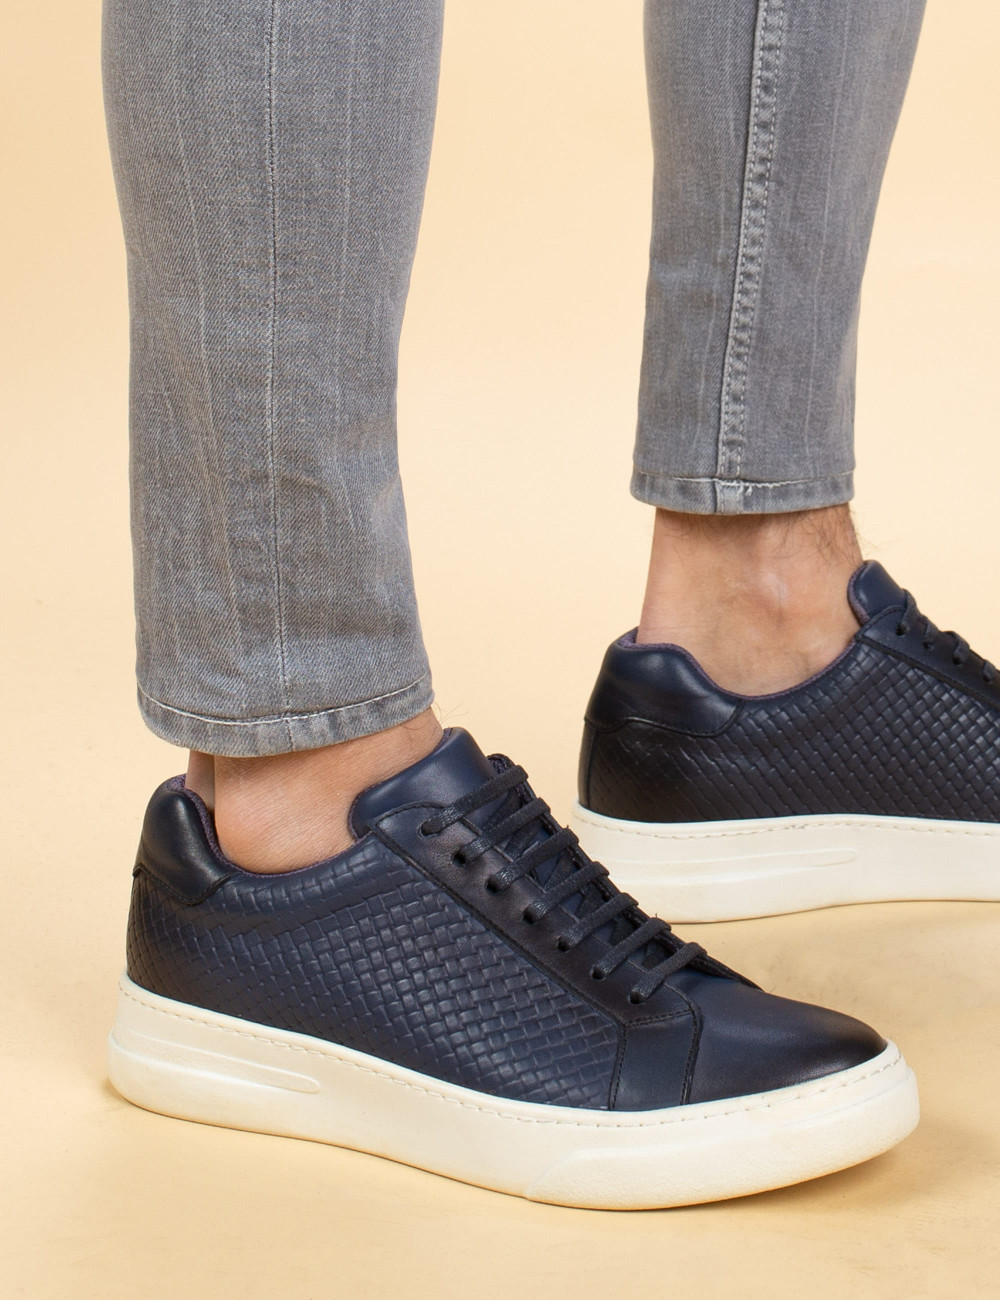 Navy  Leather Sneakers - 01737MLCVP01